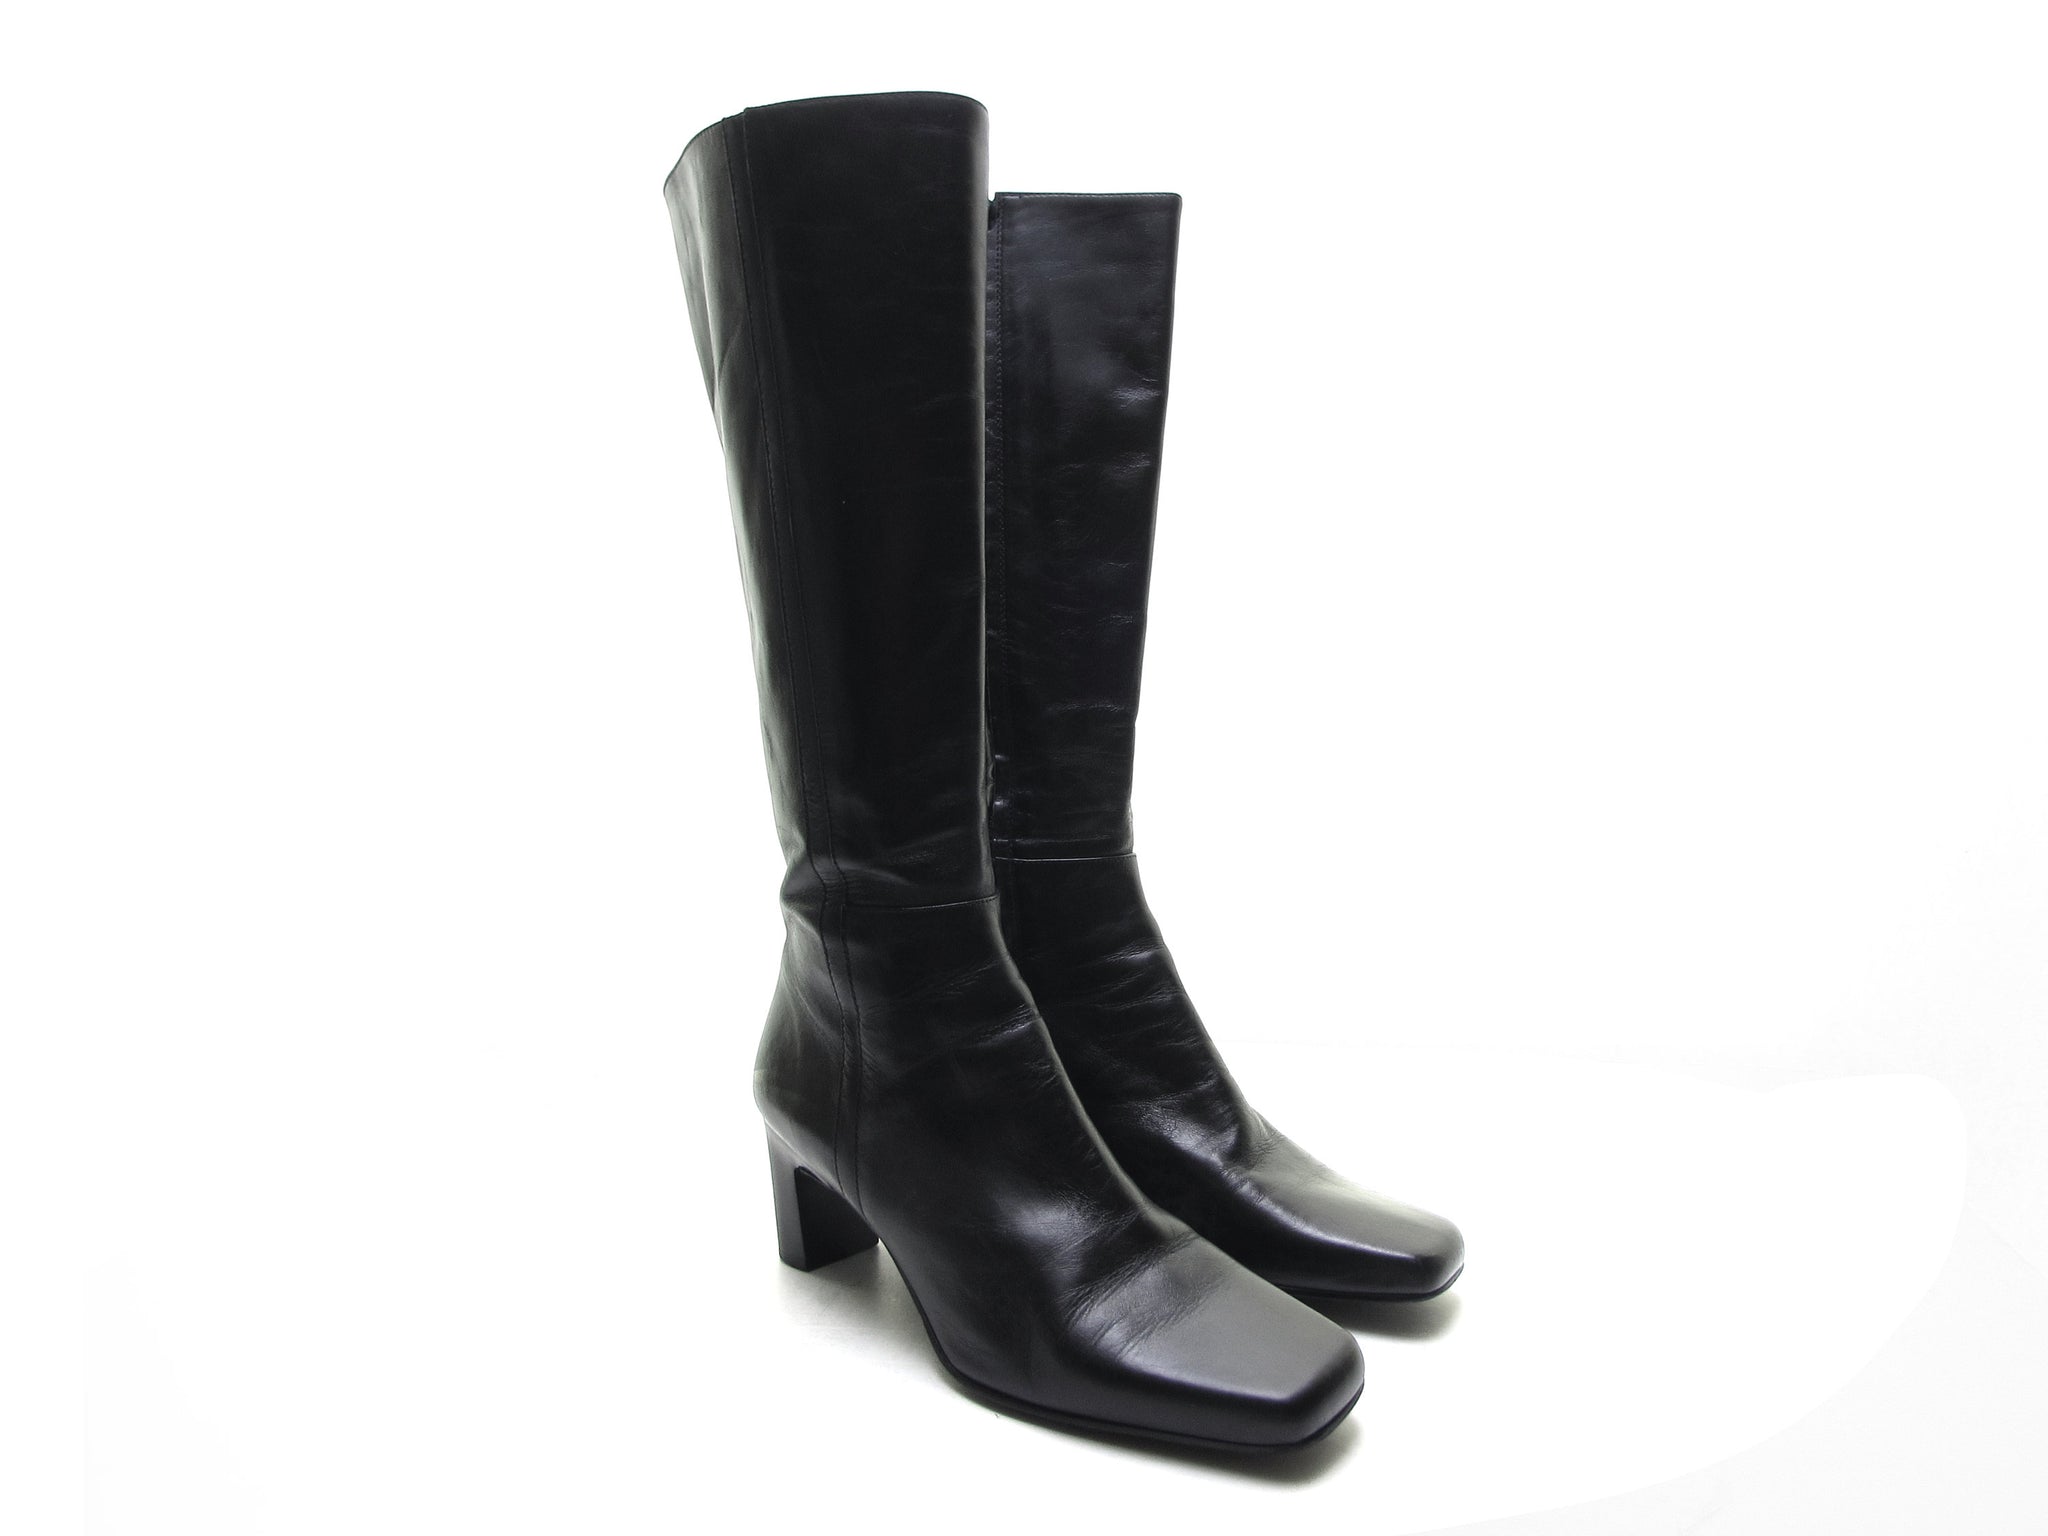 Chelle Tall Boots In Calf Suede - Black Black | NYDJ